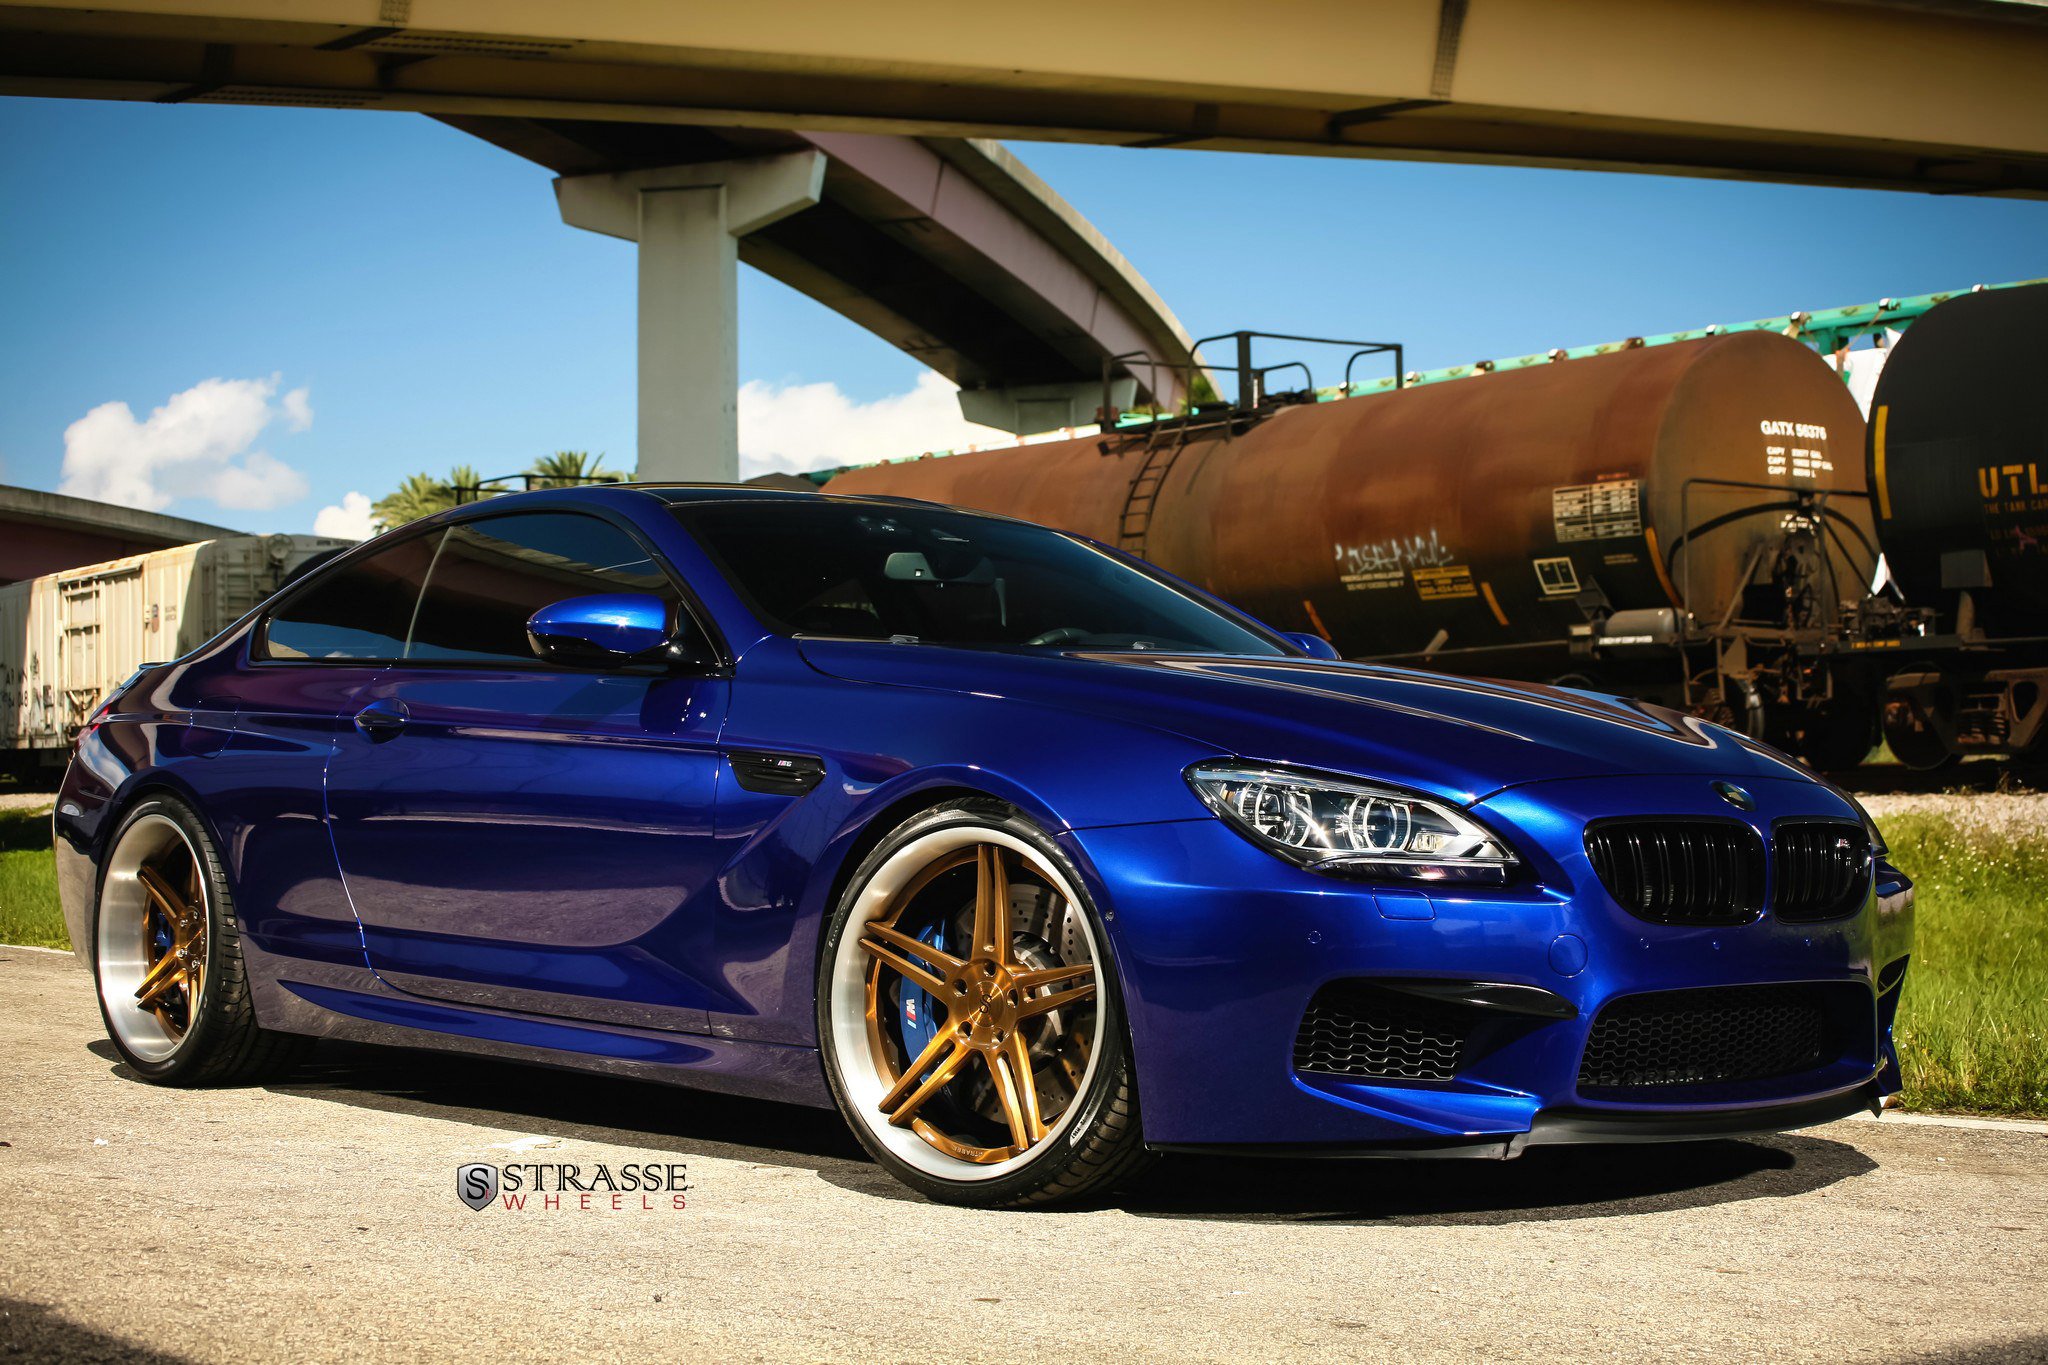 strasse, Wheels, Bmw m6, Coupe, Cars Wallpaper